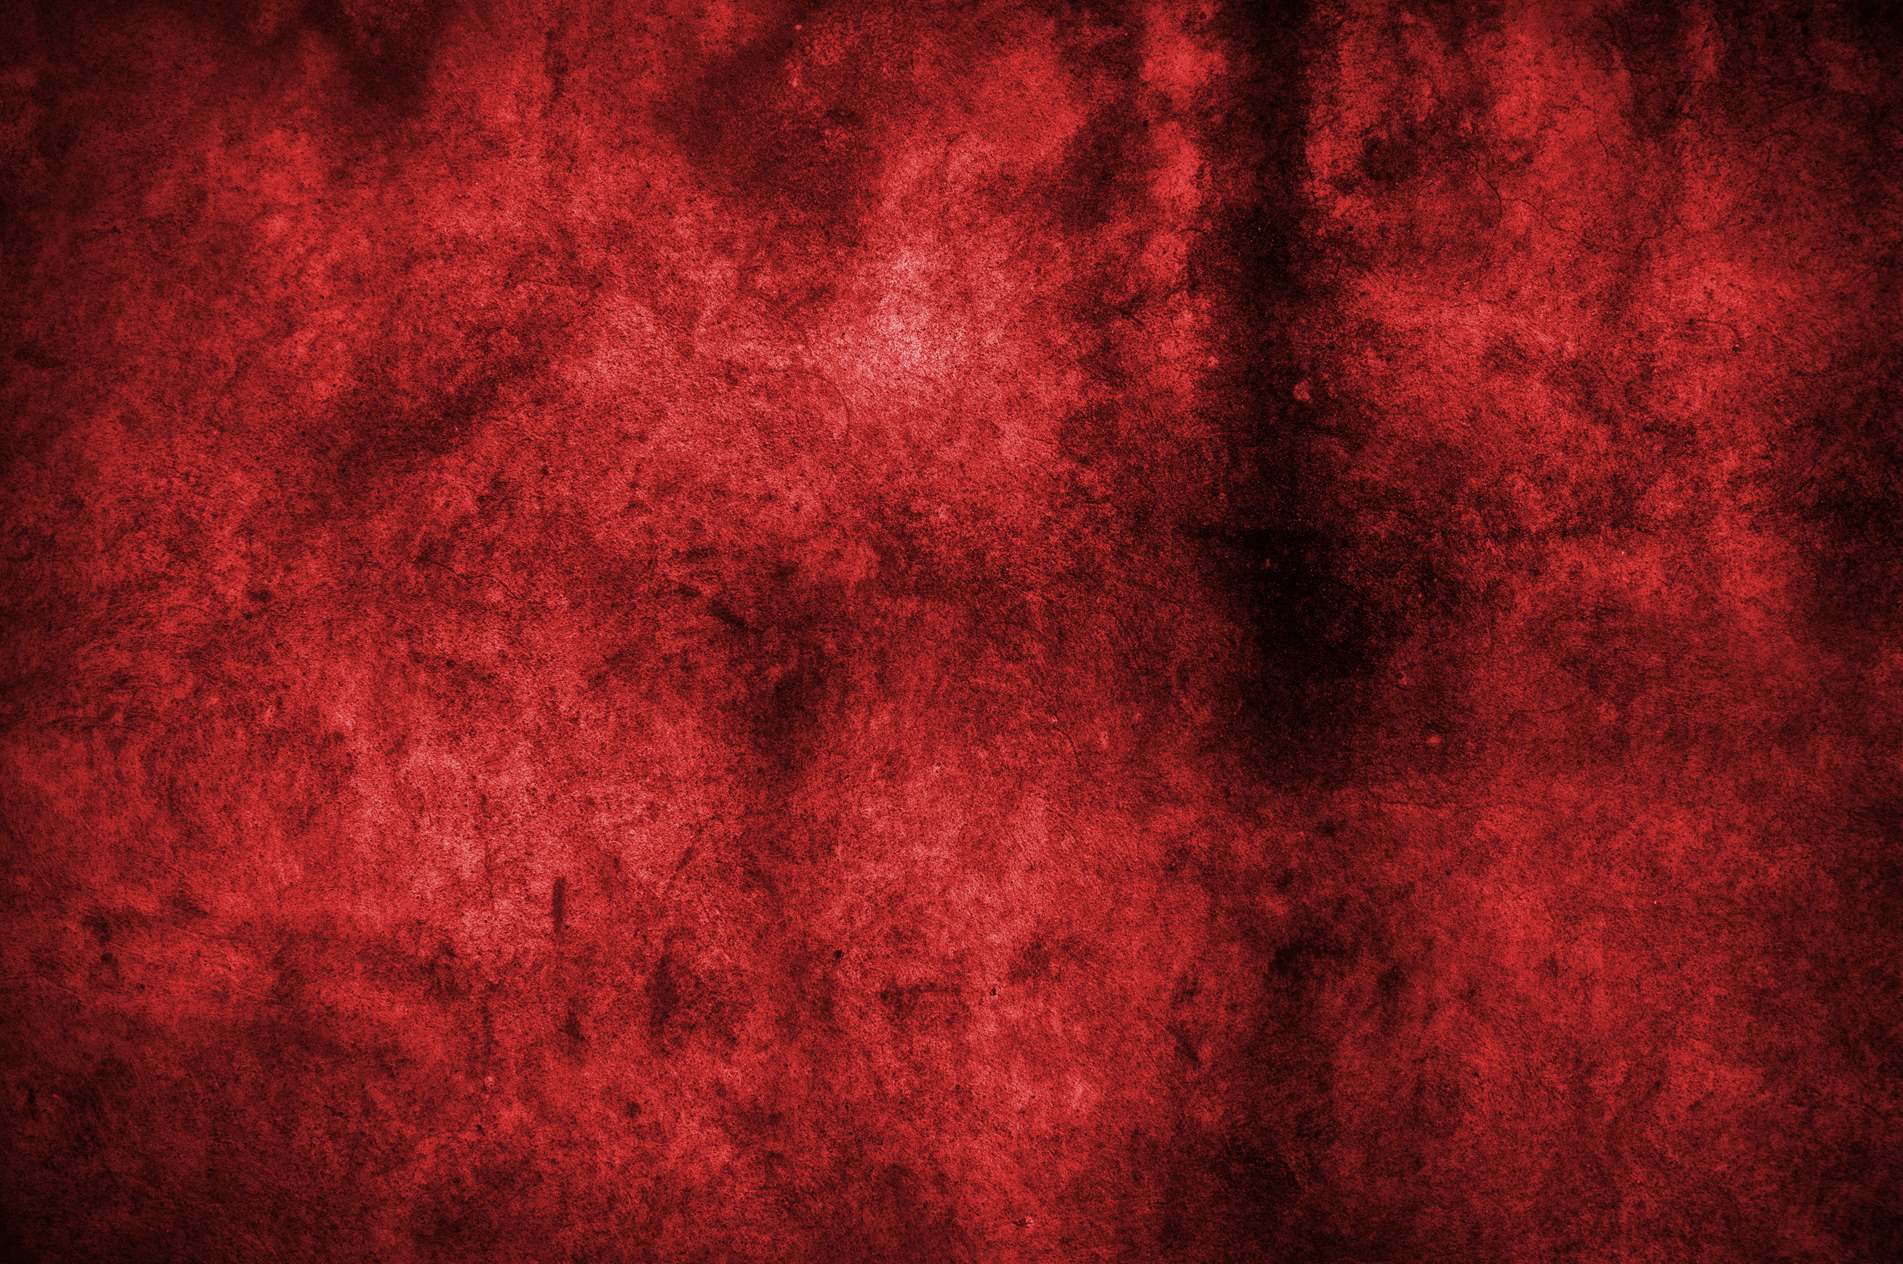 Grungy Red Wall Texture Background PhotoHDx